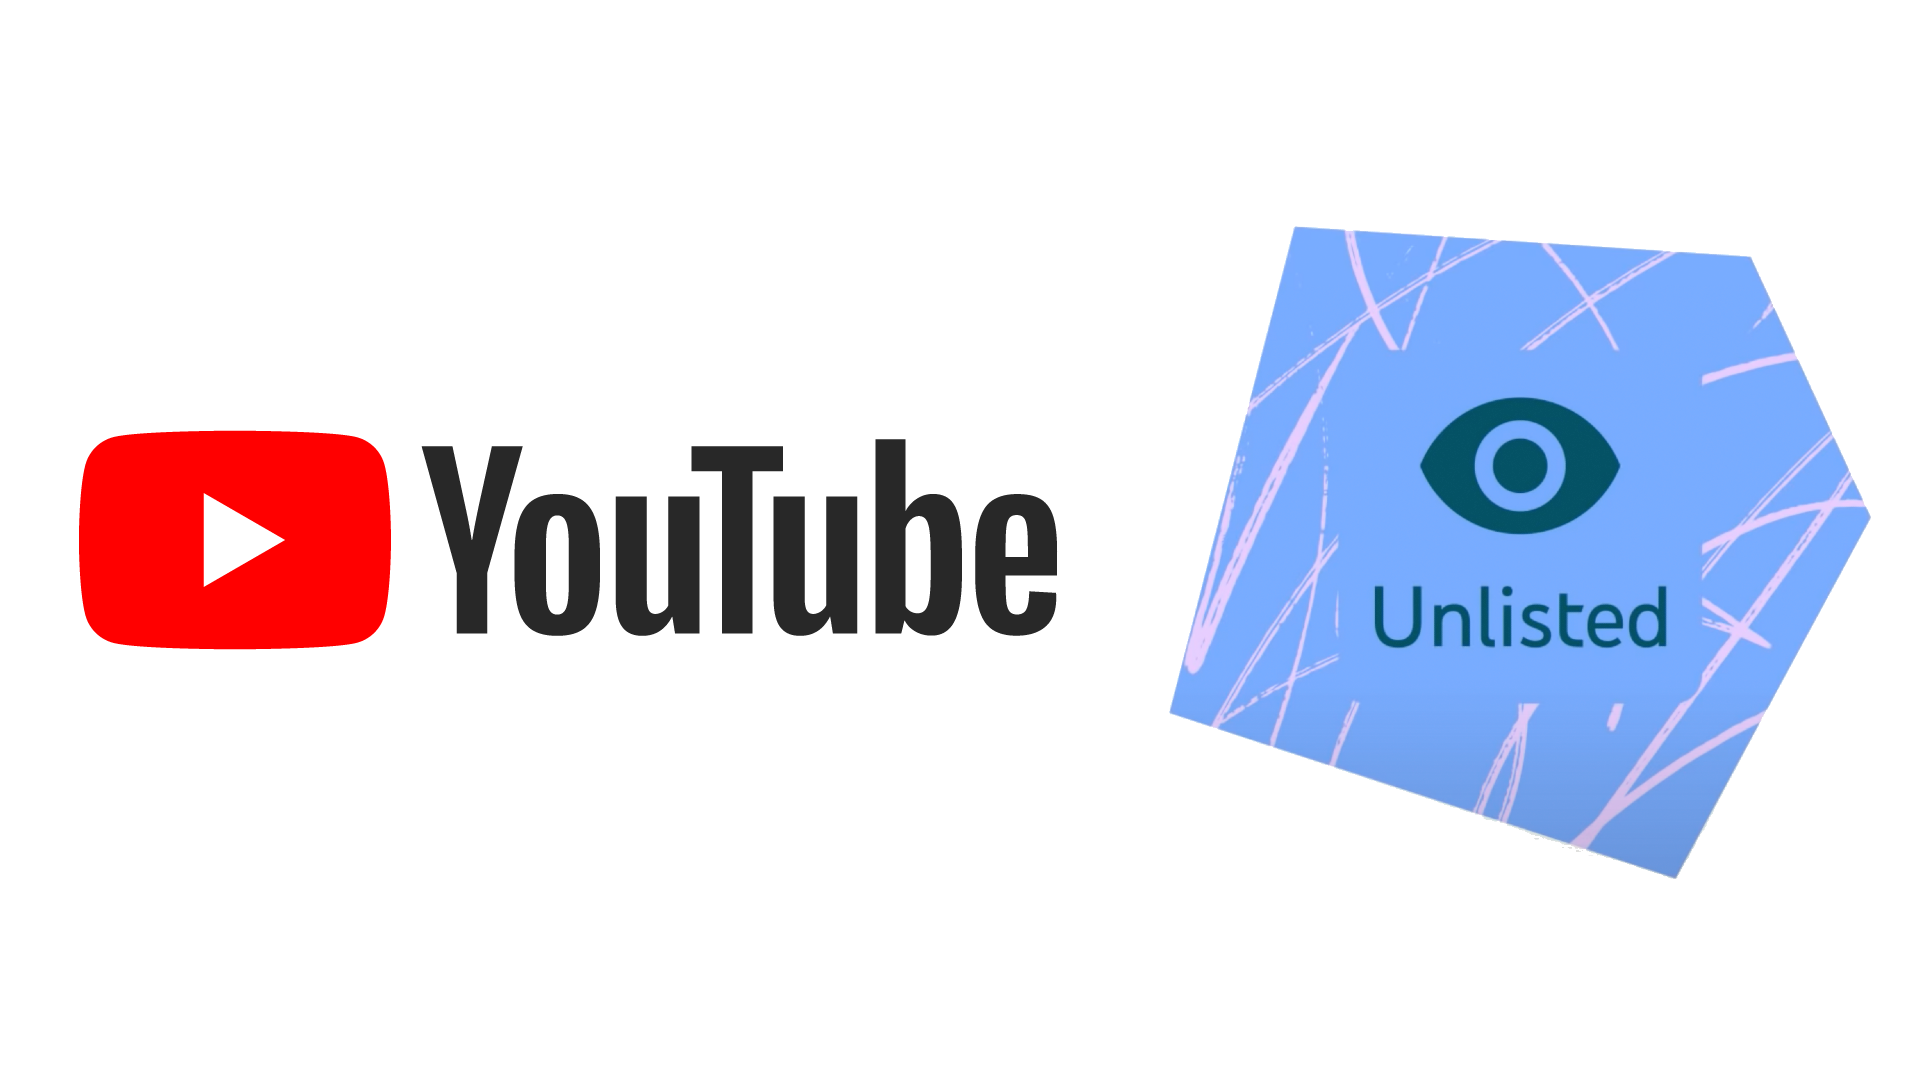 YouTube Unlisted videos uploaded before 2017 to become Private